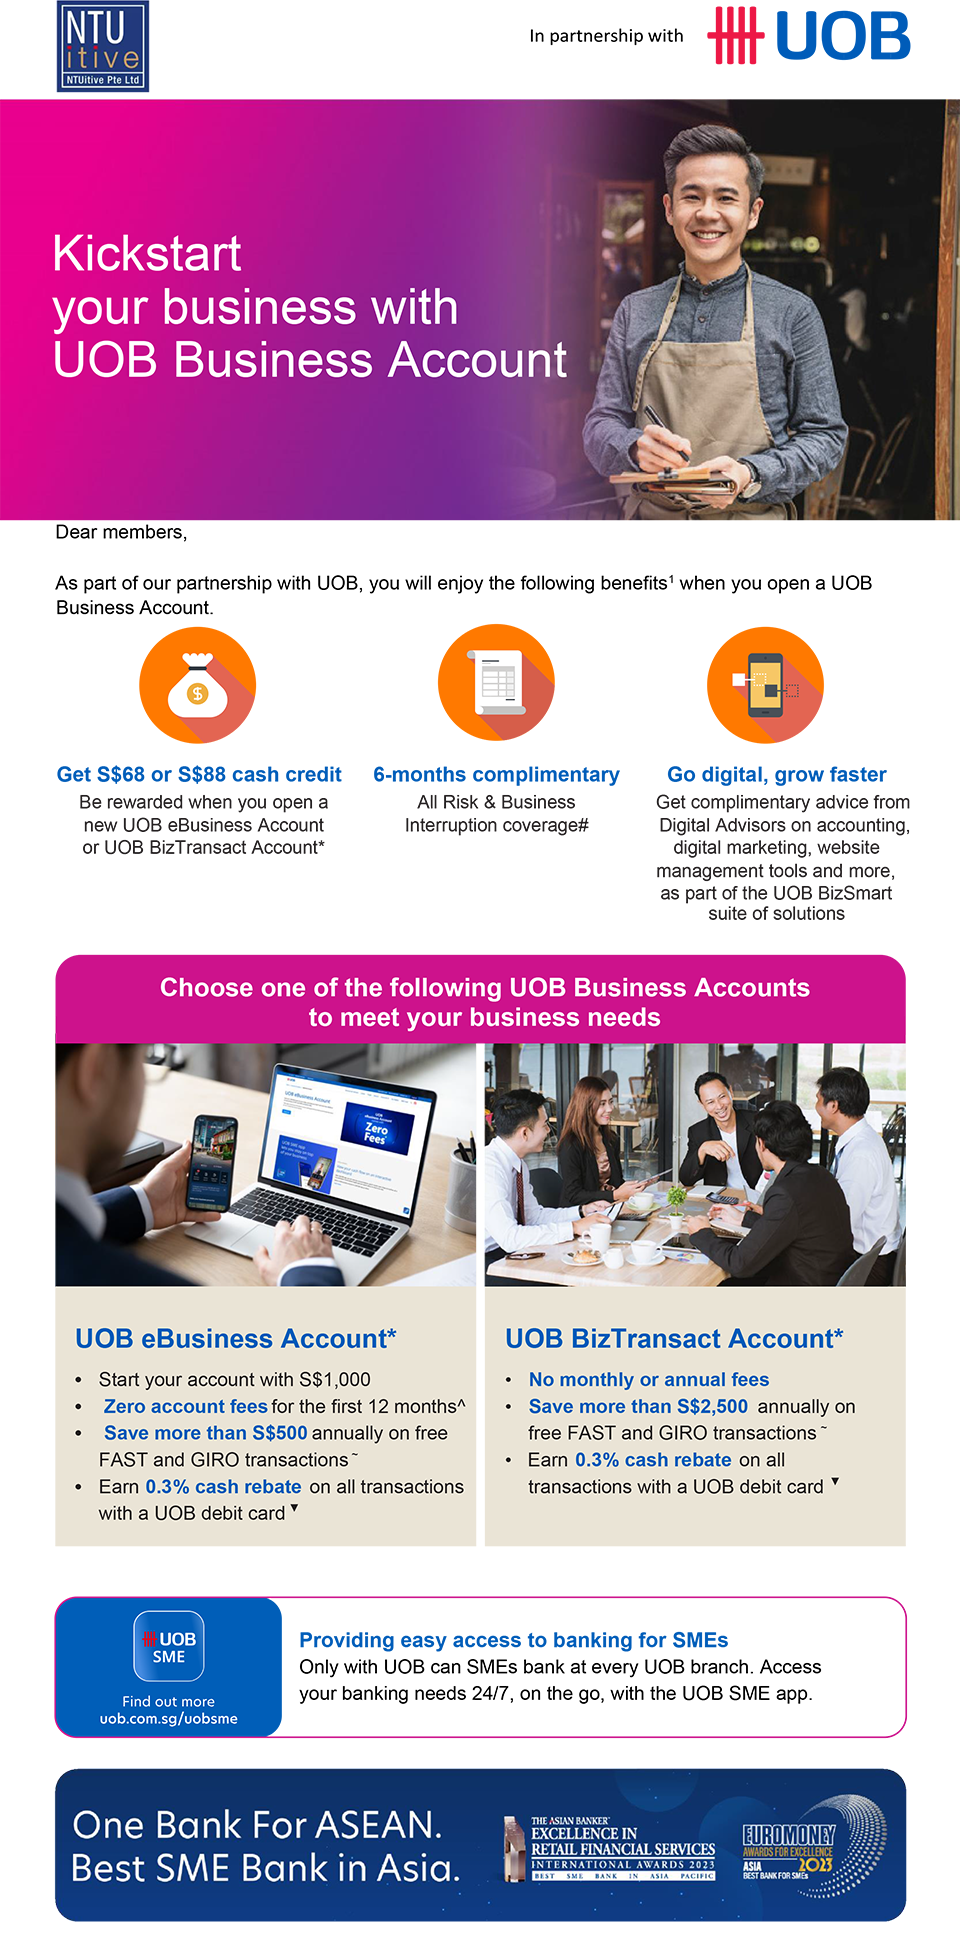 NTUitive Pte Ltd | In Partnership with UOB | Kickstart your business with UOB Business Account | Dear members, As part of our partnership with UOB, you will enjoy the following benefits1 when you open a UOB Business Account. | Get S$68 or S$88 cash credit, Be rewarded when you open a new UOB eBusiness Account or UOB BizTransact Account*; 6-months complimentary, All Risk & Business Interruption coverage#; Go digital, grow faster, Get complimentary advice from Digital Advisors on accounting, digital marketing, website management tools and more, as part of the UOB BizSmart suite of solutions | Choose one of the following UOB Business Accounts to meet your business needs | UOB eBusiness Account*. Start your account with S$1,000. Zero account fees for the first 12 months^. Save more than S$500 annually on free FAST and GIRO transactions~. Earn 0.3% cash rebateon all transactions with a UOB debit card▼ | UOB BizTransact Account*. No monthly or annual fees. Save more than S$2,500 annually on free FAST and GIRO transactions~. Earn 0.3% cash rebateon all transactions with a UOB debit card▼ | UOB SME. Find out more uob.co.sg/uobsme. Providing easy access to banking for SMEs. Only with UOB can SMEs bank at every UOB branch. Access your banking needs 24/7, on the go, with the UOB SME app. | One Bank for ASEAN. Best SME Bank in Asia. 